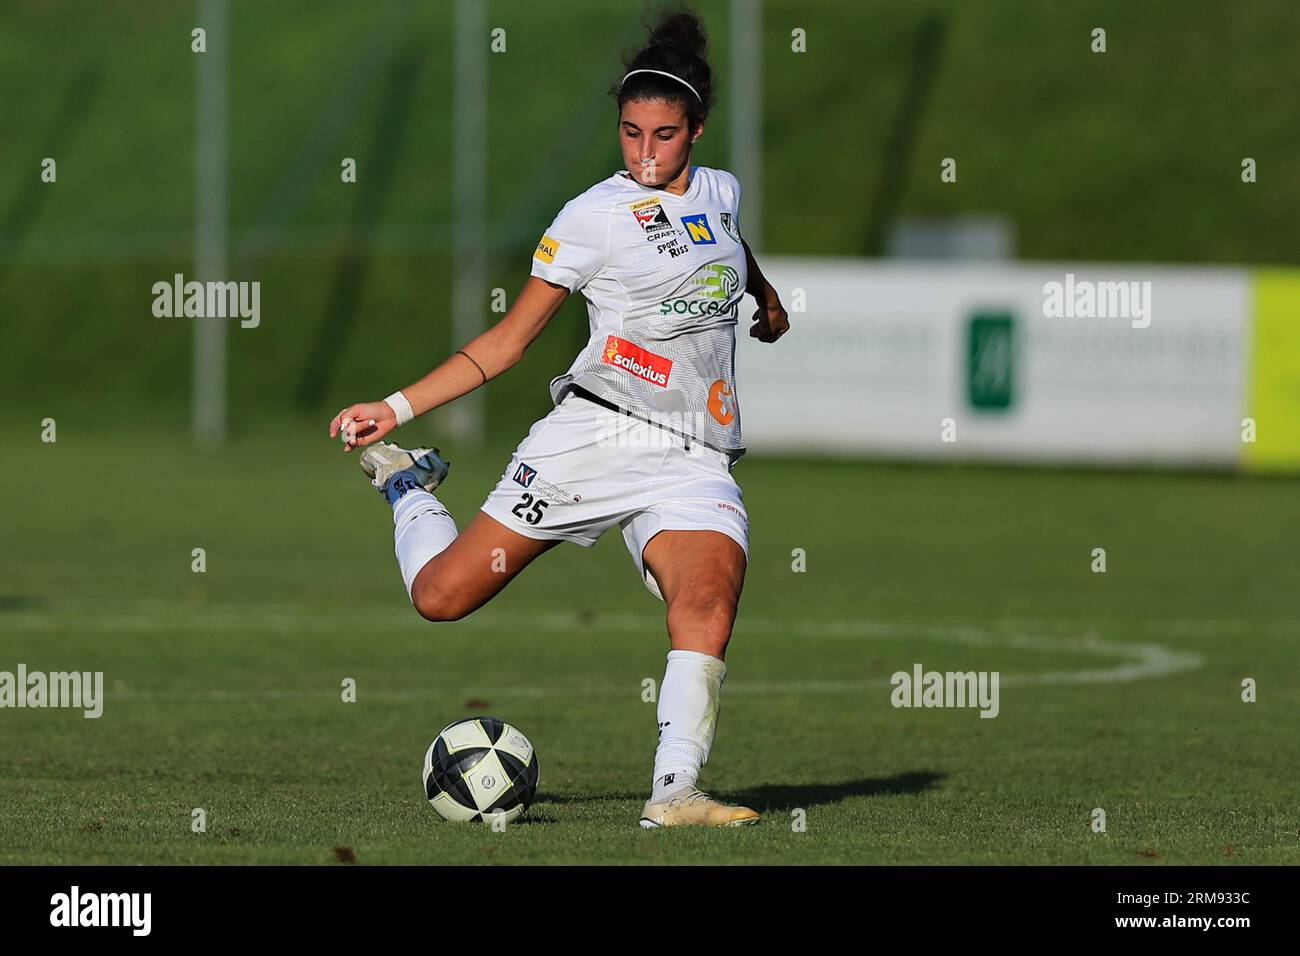 Evelyn Kurz (25 Neulengbach) in action during the Admiral Frauen Bundesliga match Neulengbach vs Vienna at Wienerwald Stadion (Tom Seiss/ SPP) Credit: SPP Sport Press Photo. /Alamy Live News Stock Photo